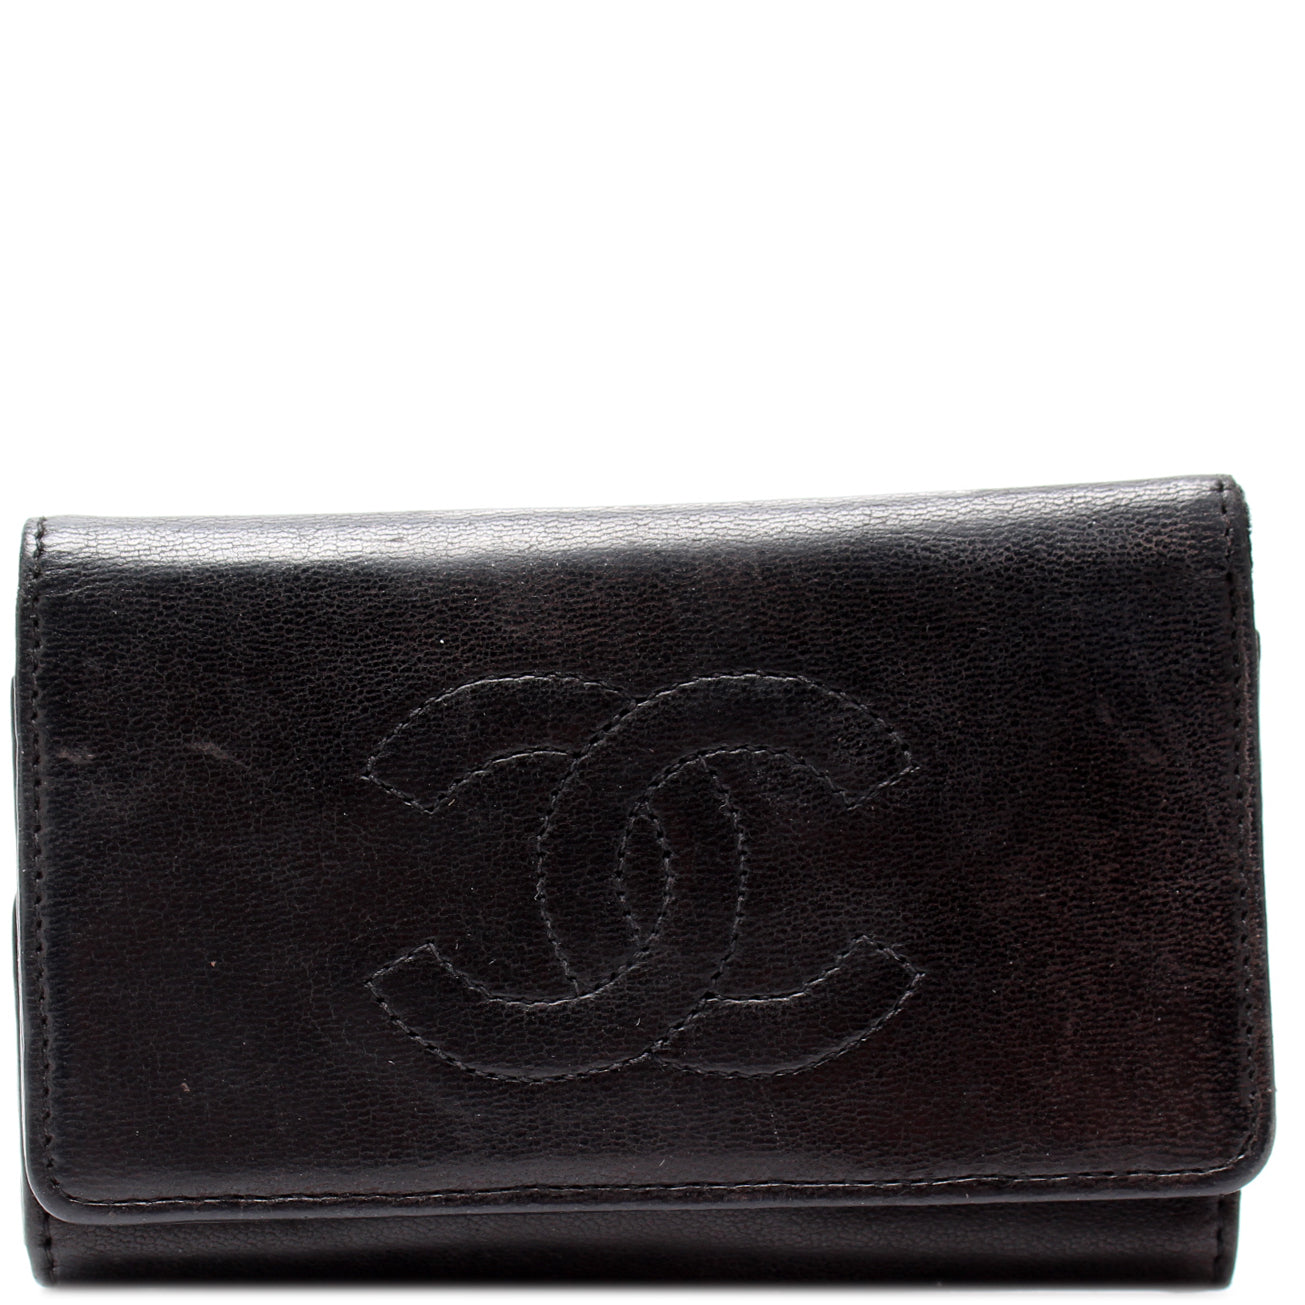 Authenticate Your Chanel – Labels Luxury